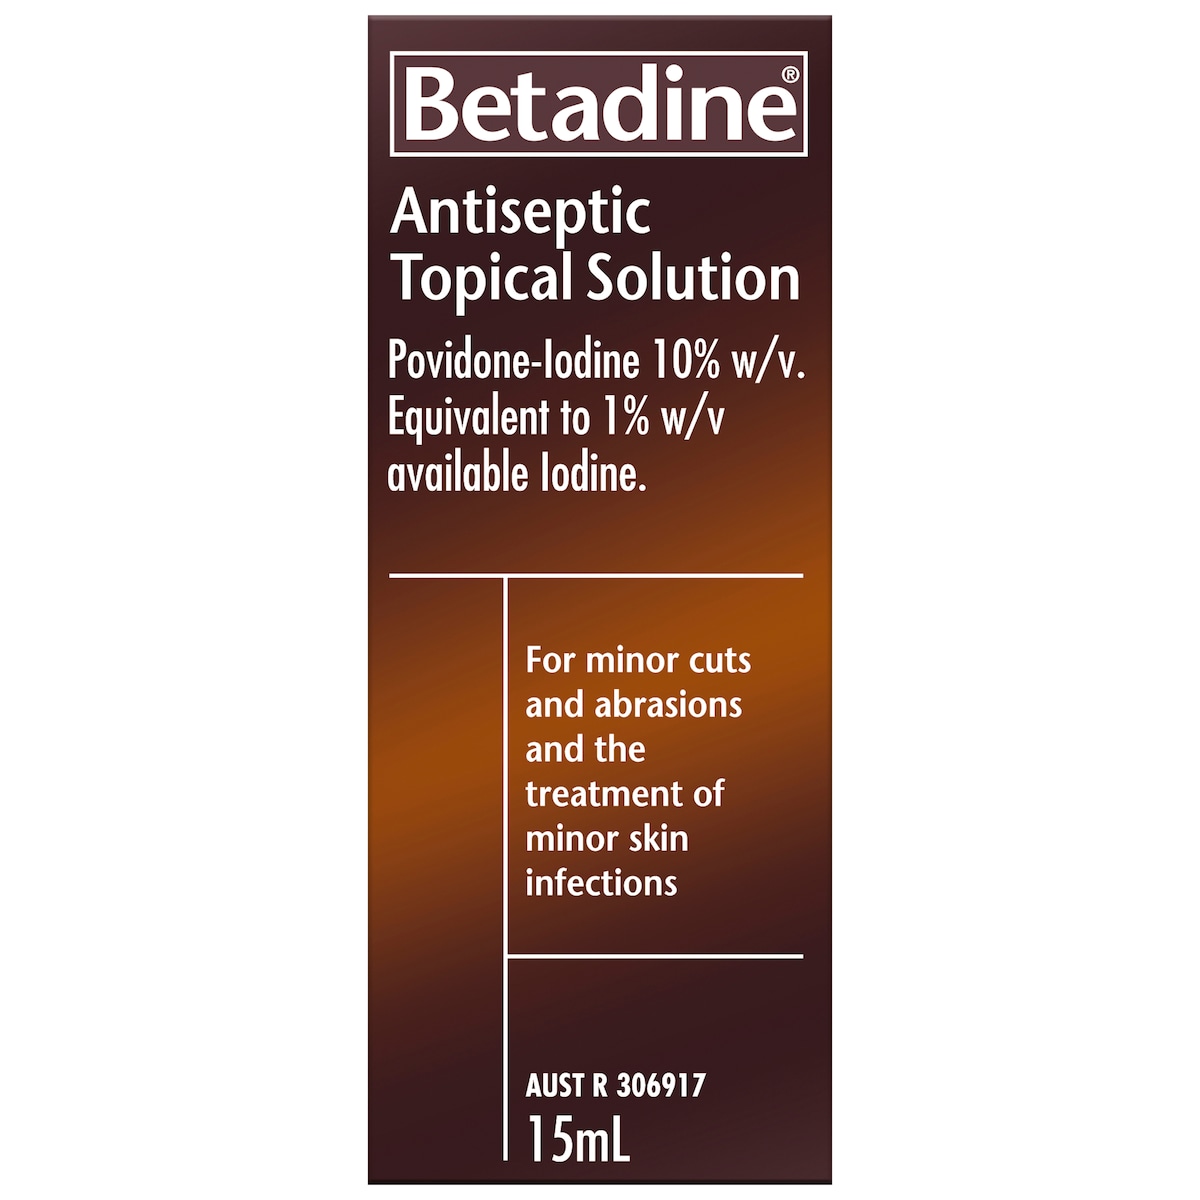 Betadine Antiseptic Topical Solution 15Ml